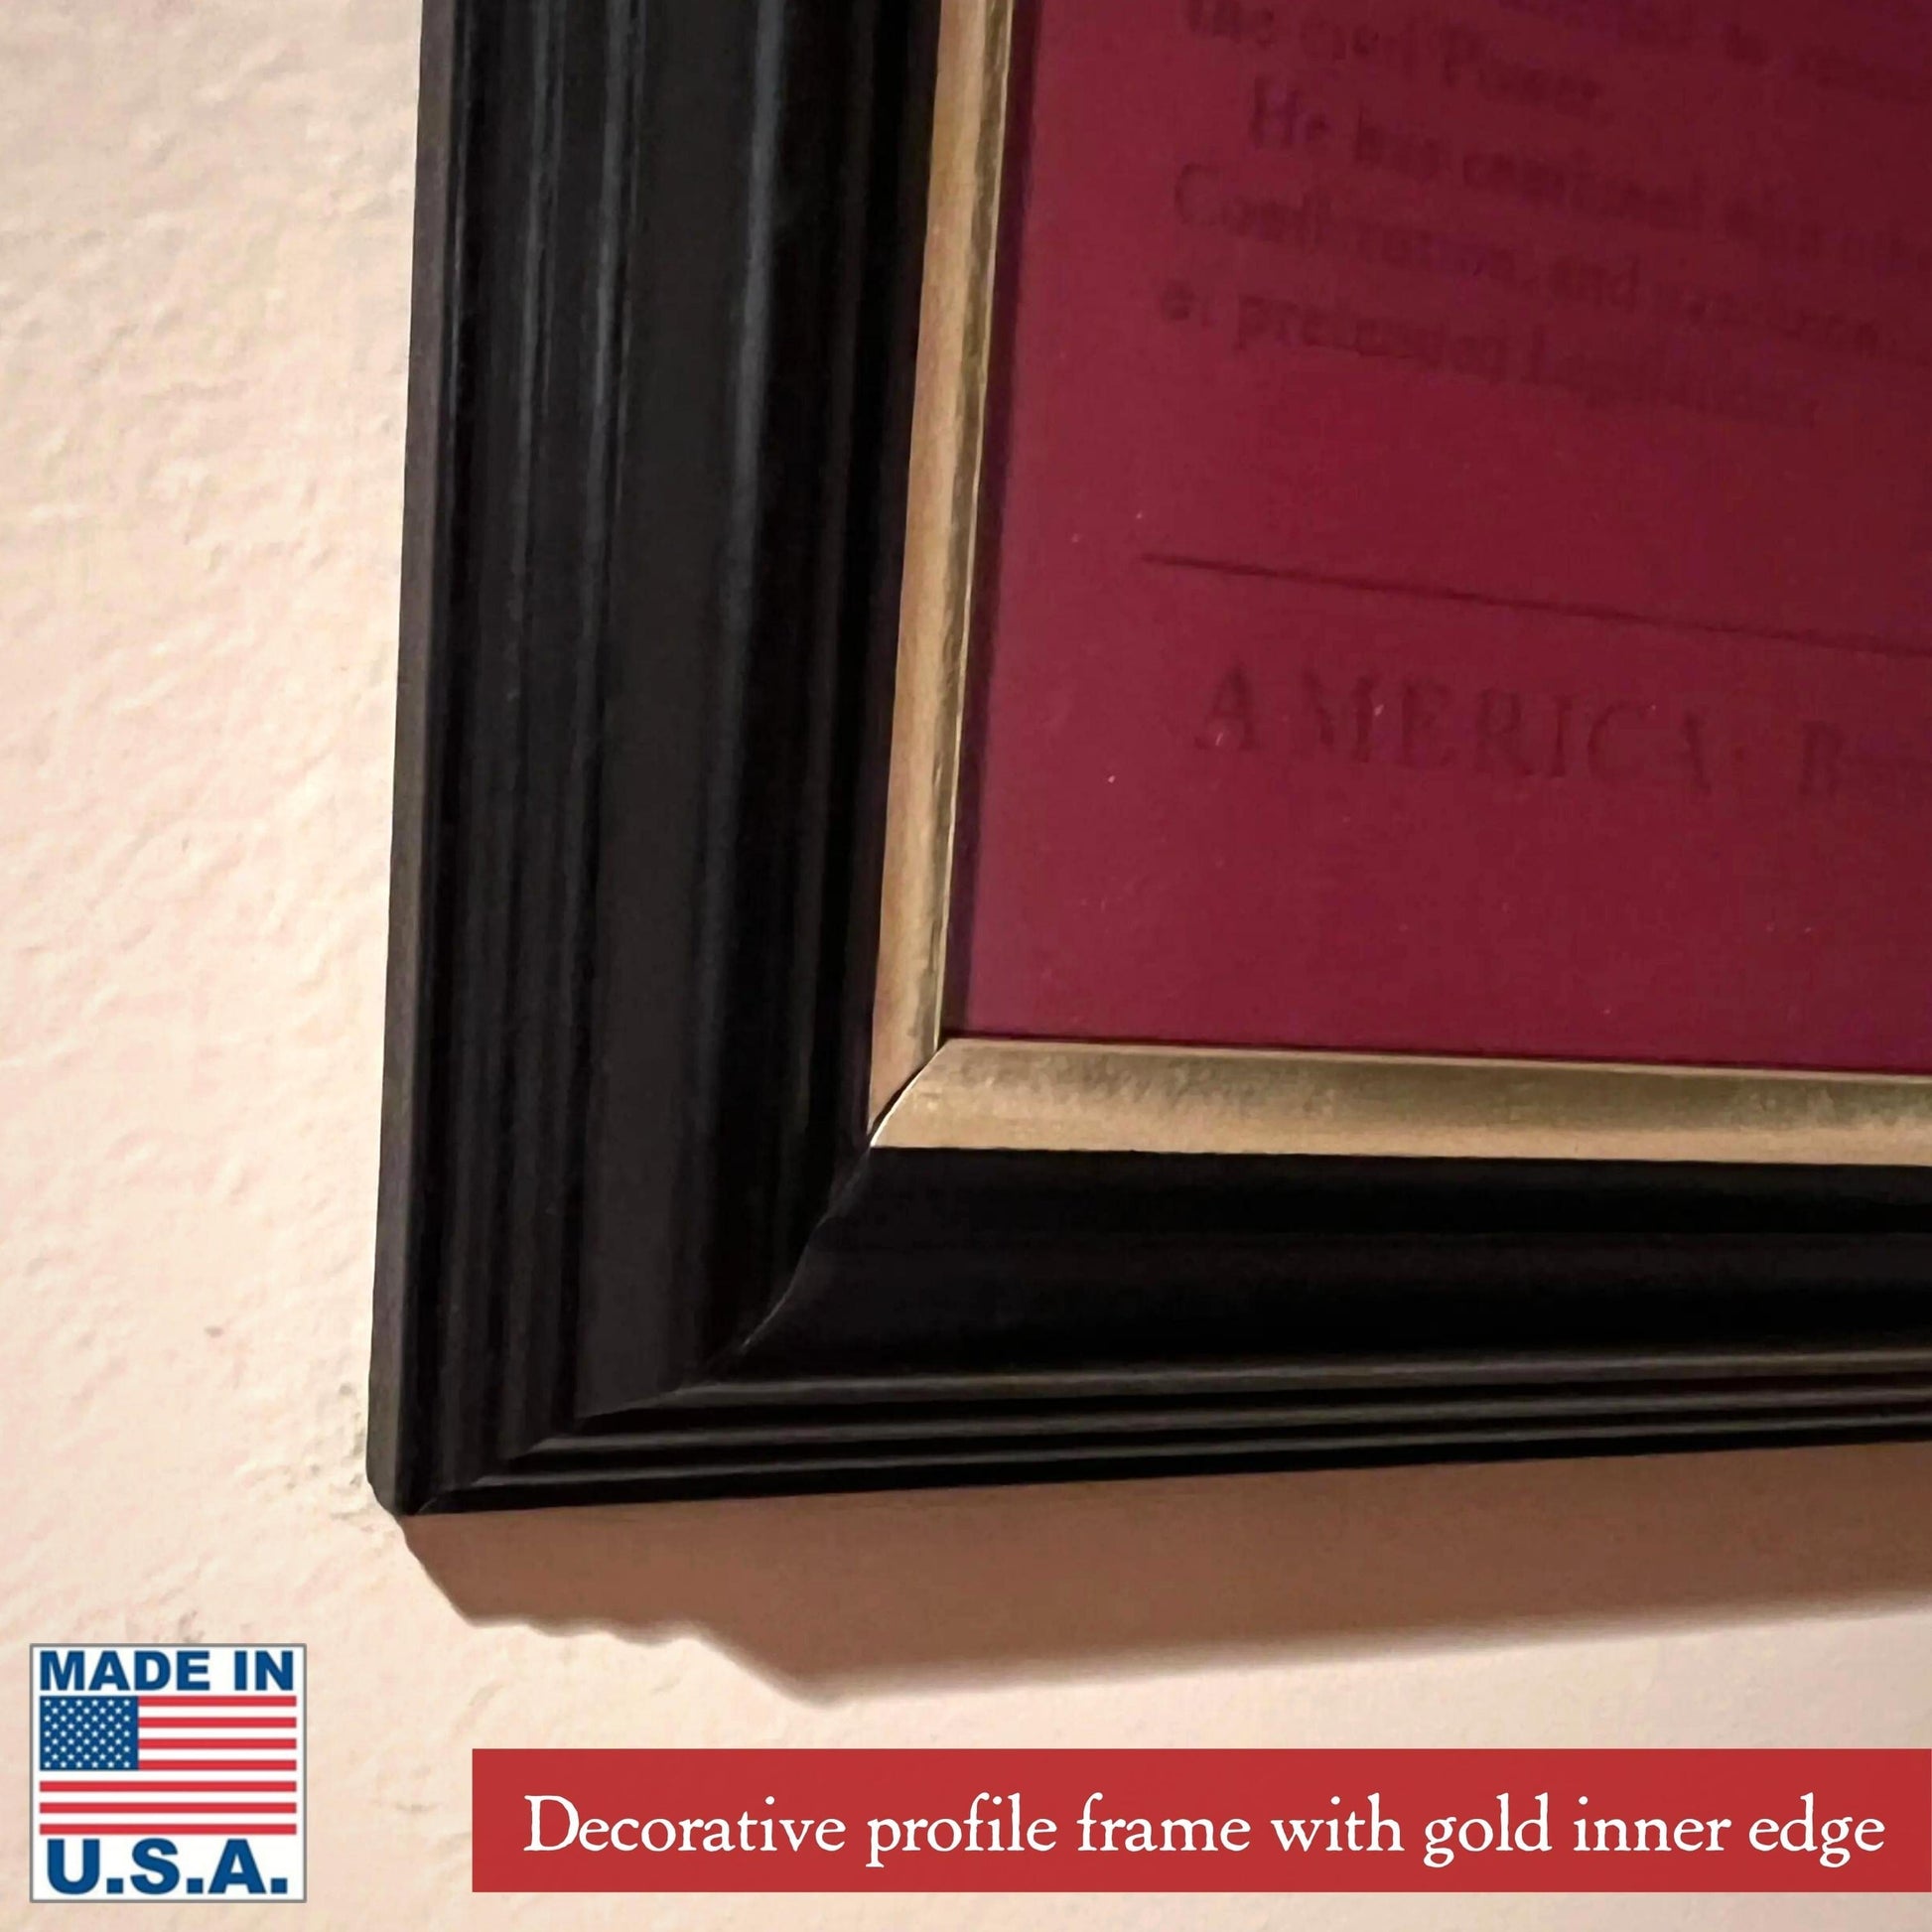 Edge of gold inner edge frame of "Proclaim Liberty” on a Boston broadside of the Declaration of Independence from The History List store